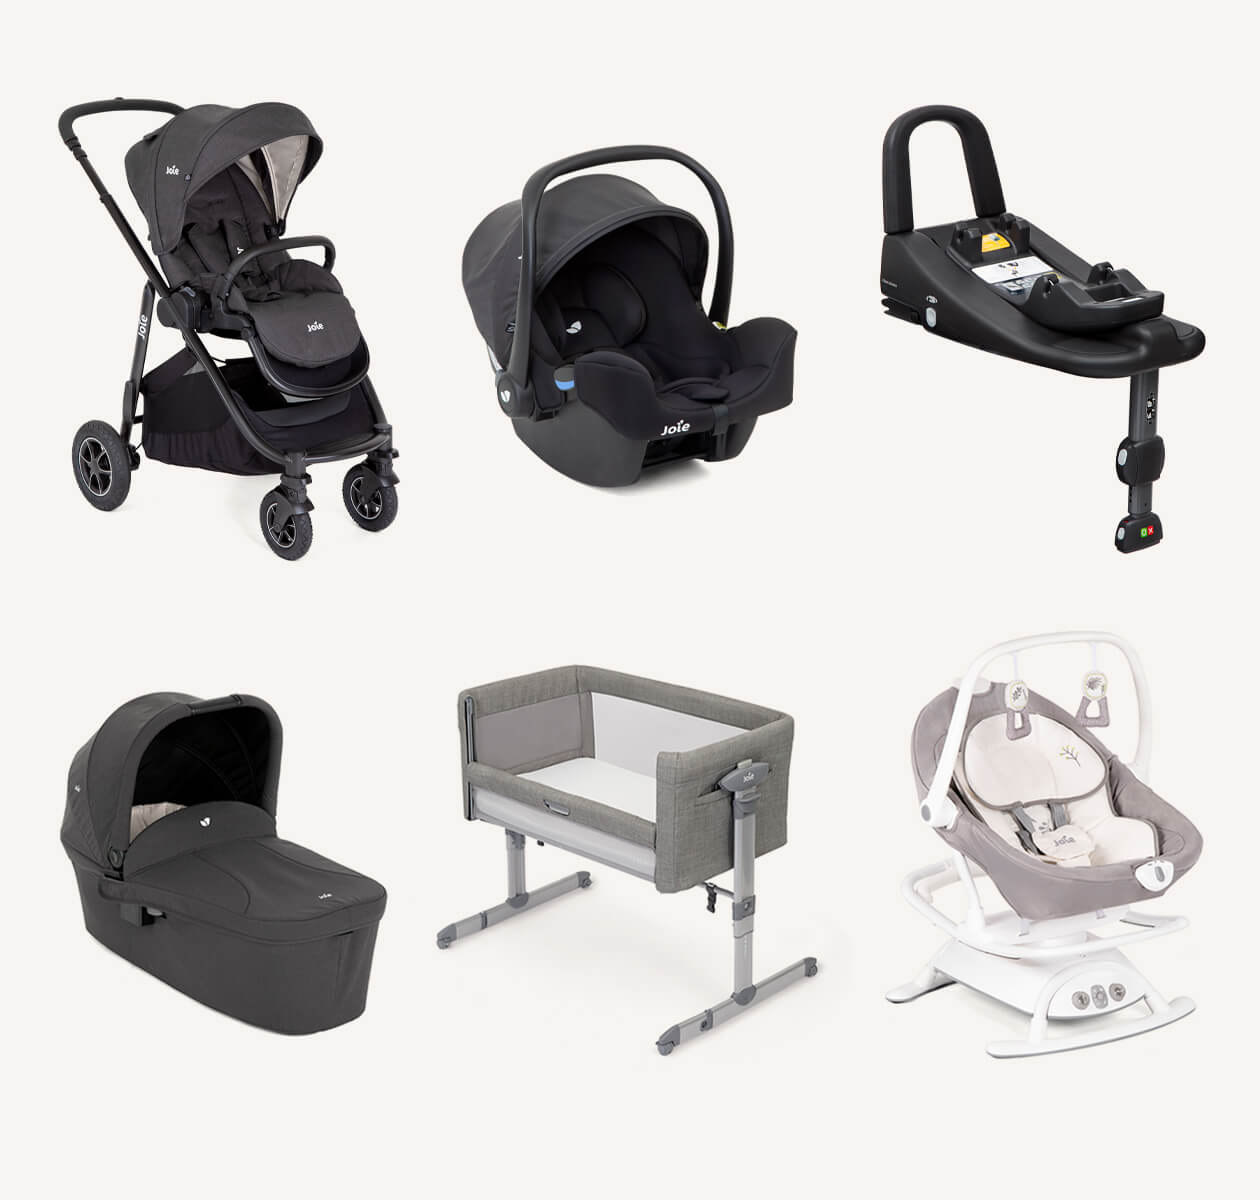  Collage showing all 6 products in the Joie Newborn Essentials bundle. Top row left to right: Versatrax pram, I-Snug 2 infant car seat, I-Base Advance car seat base. Bottom row left to right: Ramble XL carry cot, Roomie Glide bedside crib, Sansa 2in1 glid